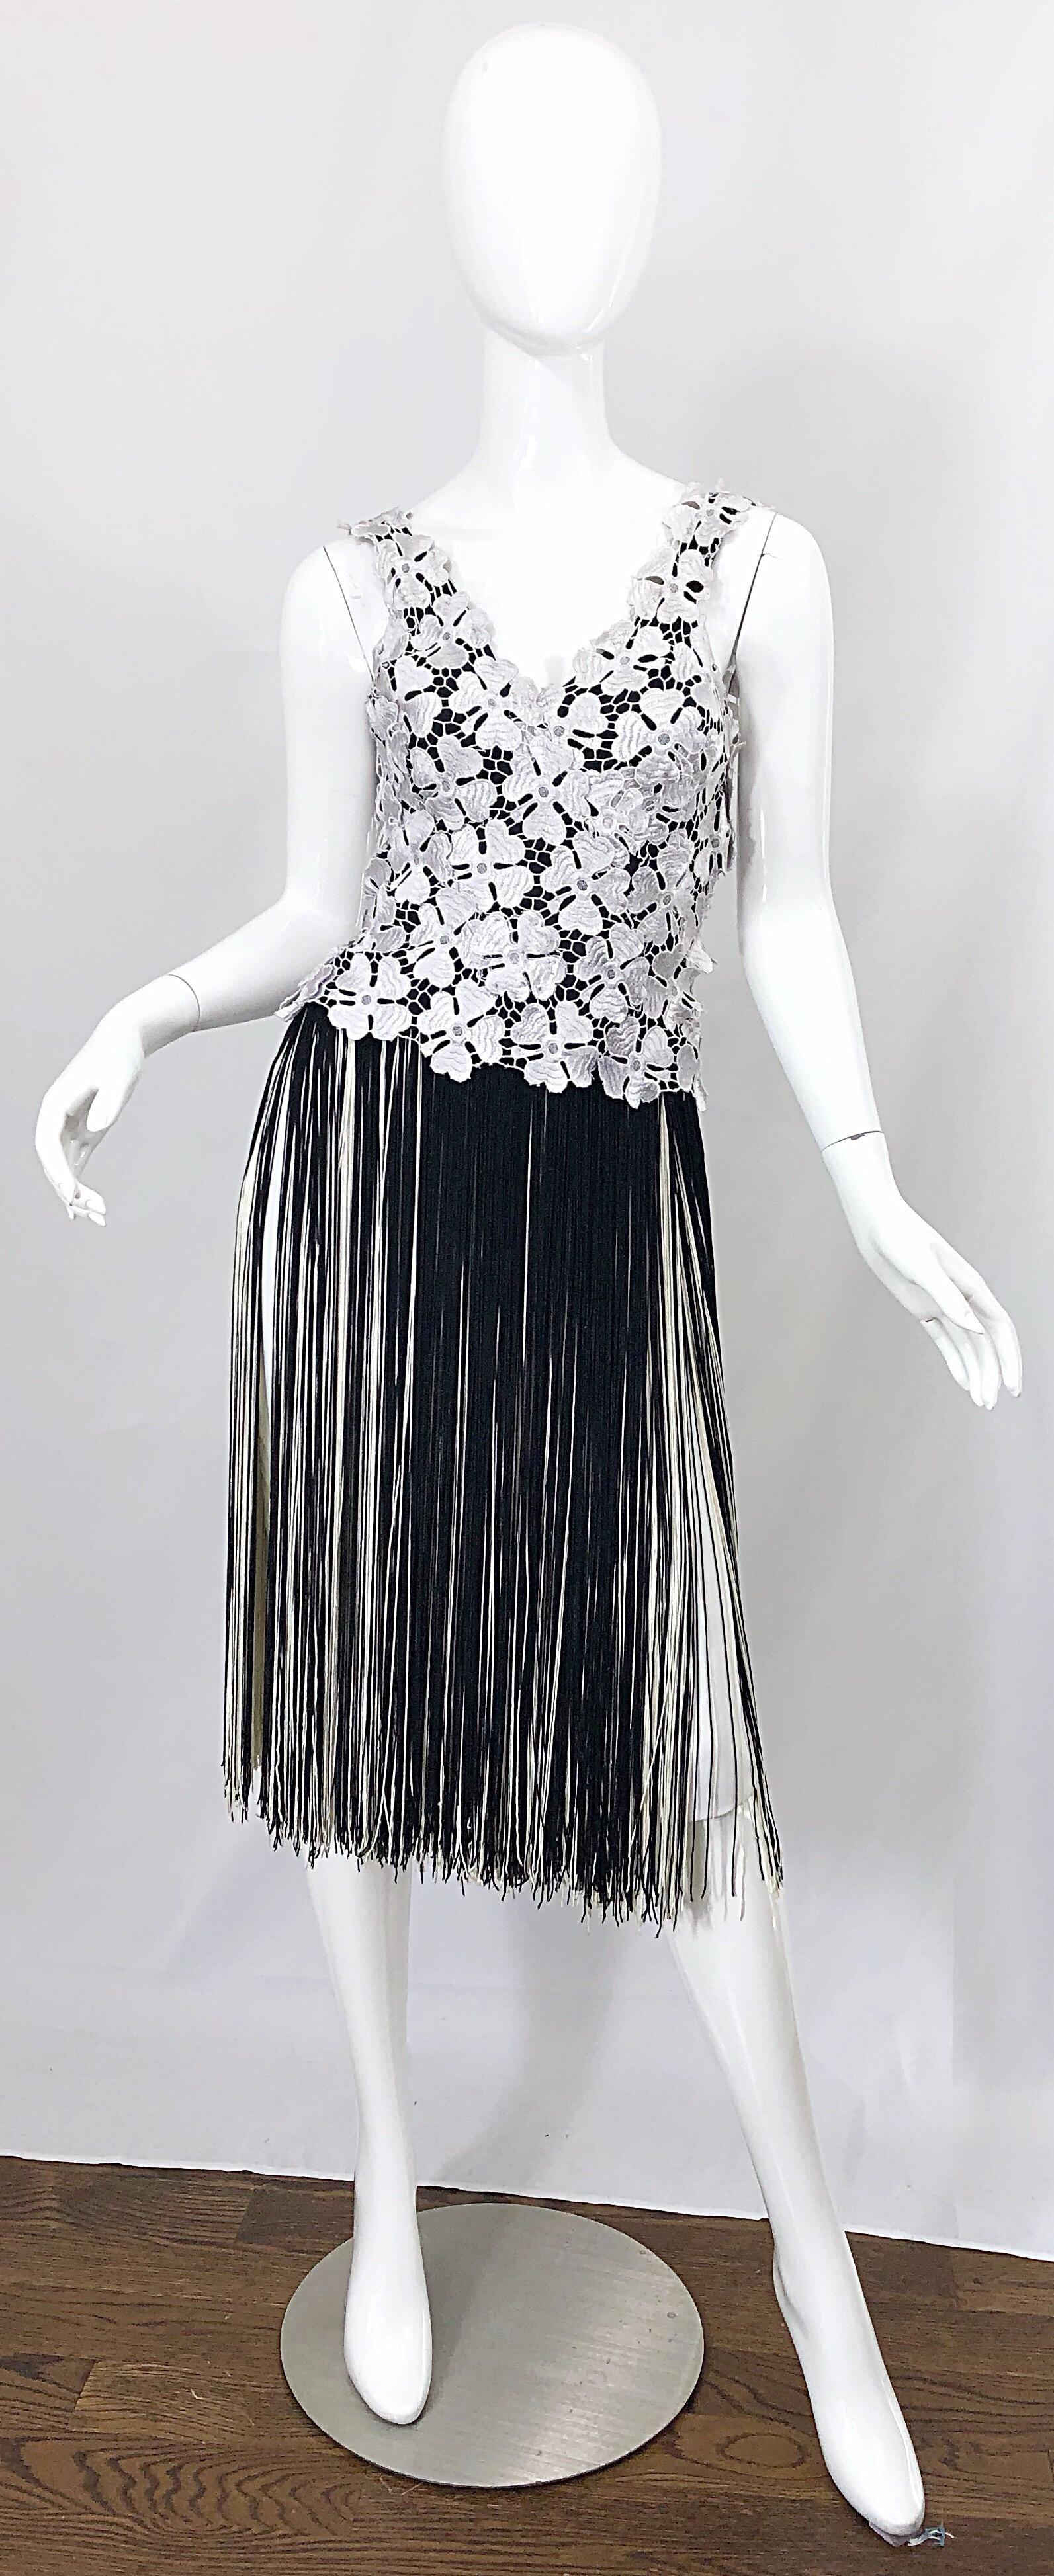 Amazing 70s LILLIE RUBIN black and white crochet flapper style cocktail dress! Features white hand crochet flowers over a black rayon bodice. White skirt features hundreds of layers of fringe in black and white. Hidden zipper up the side with